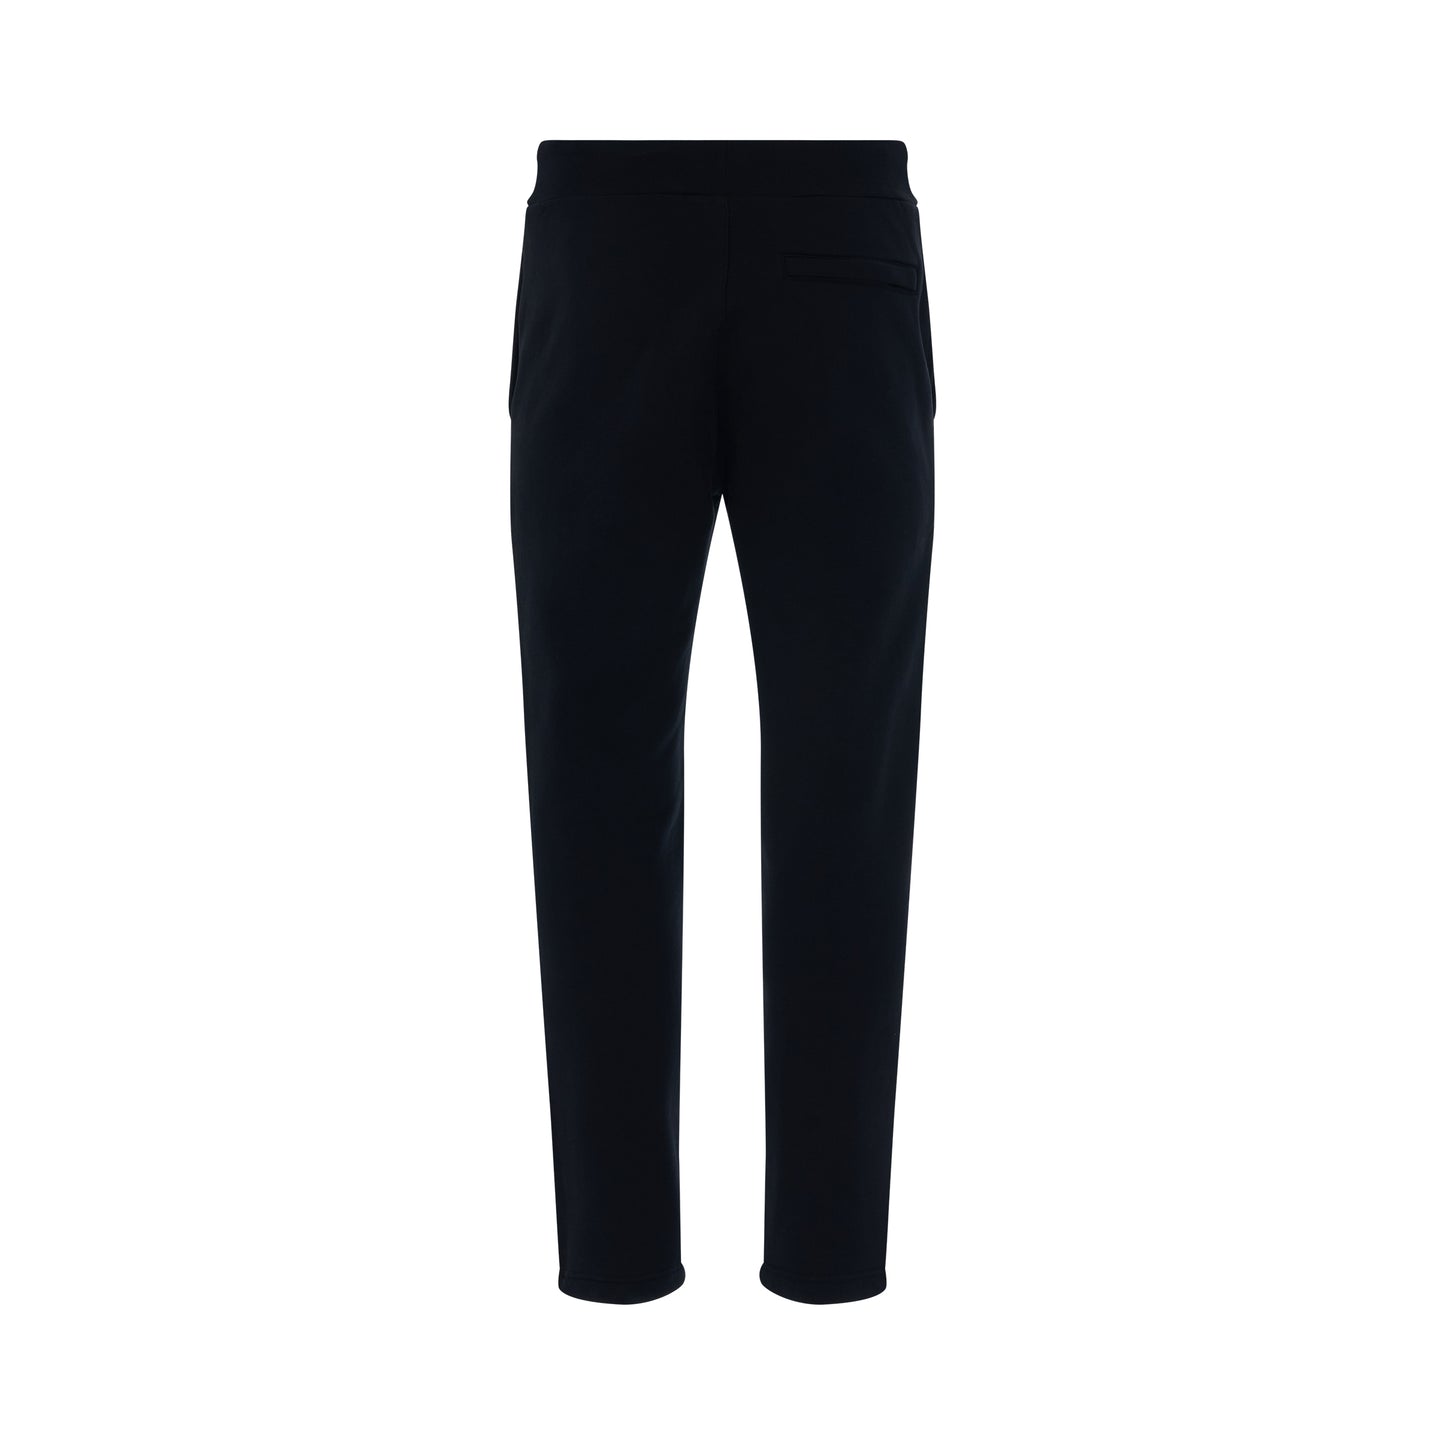 Garment Dyed Sweatpant in Black